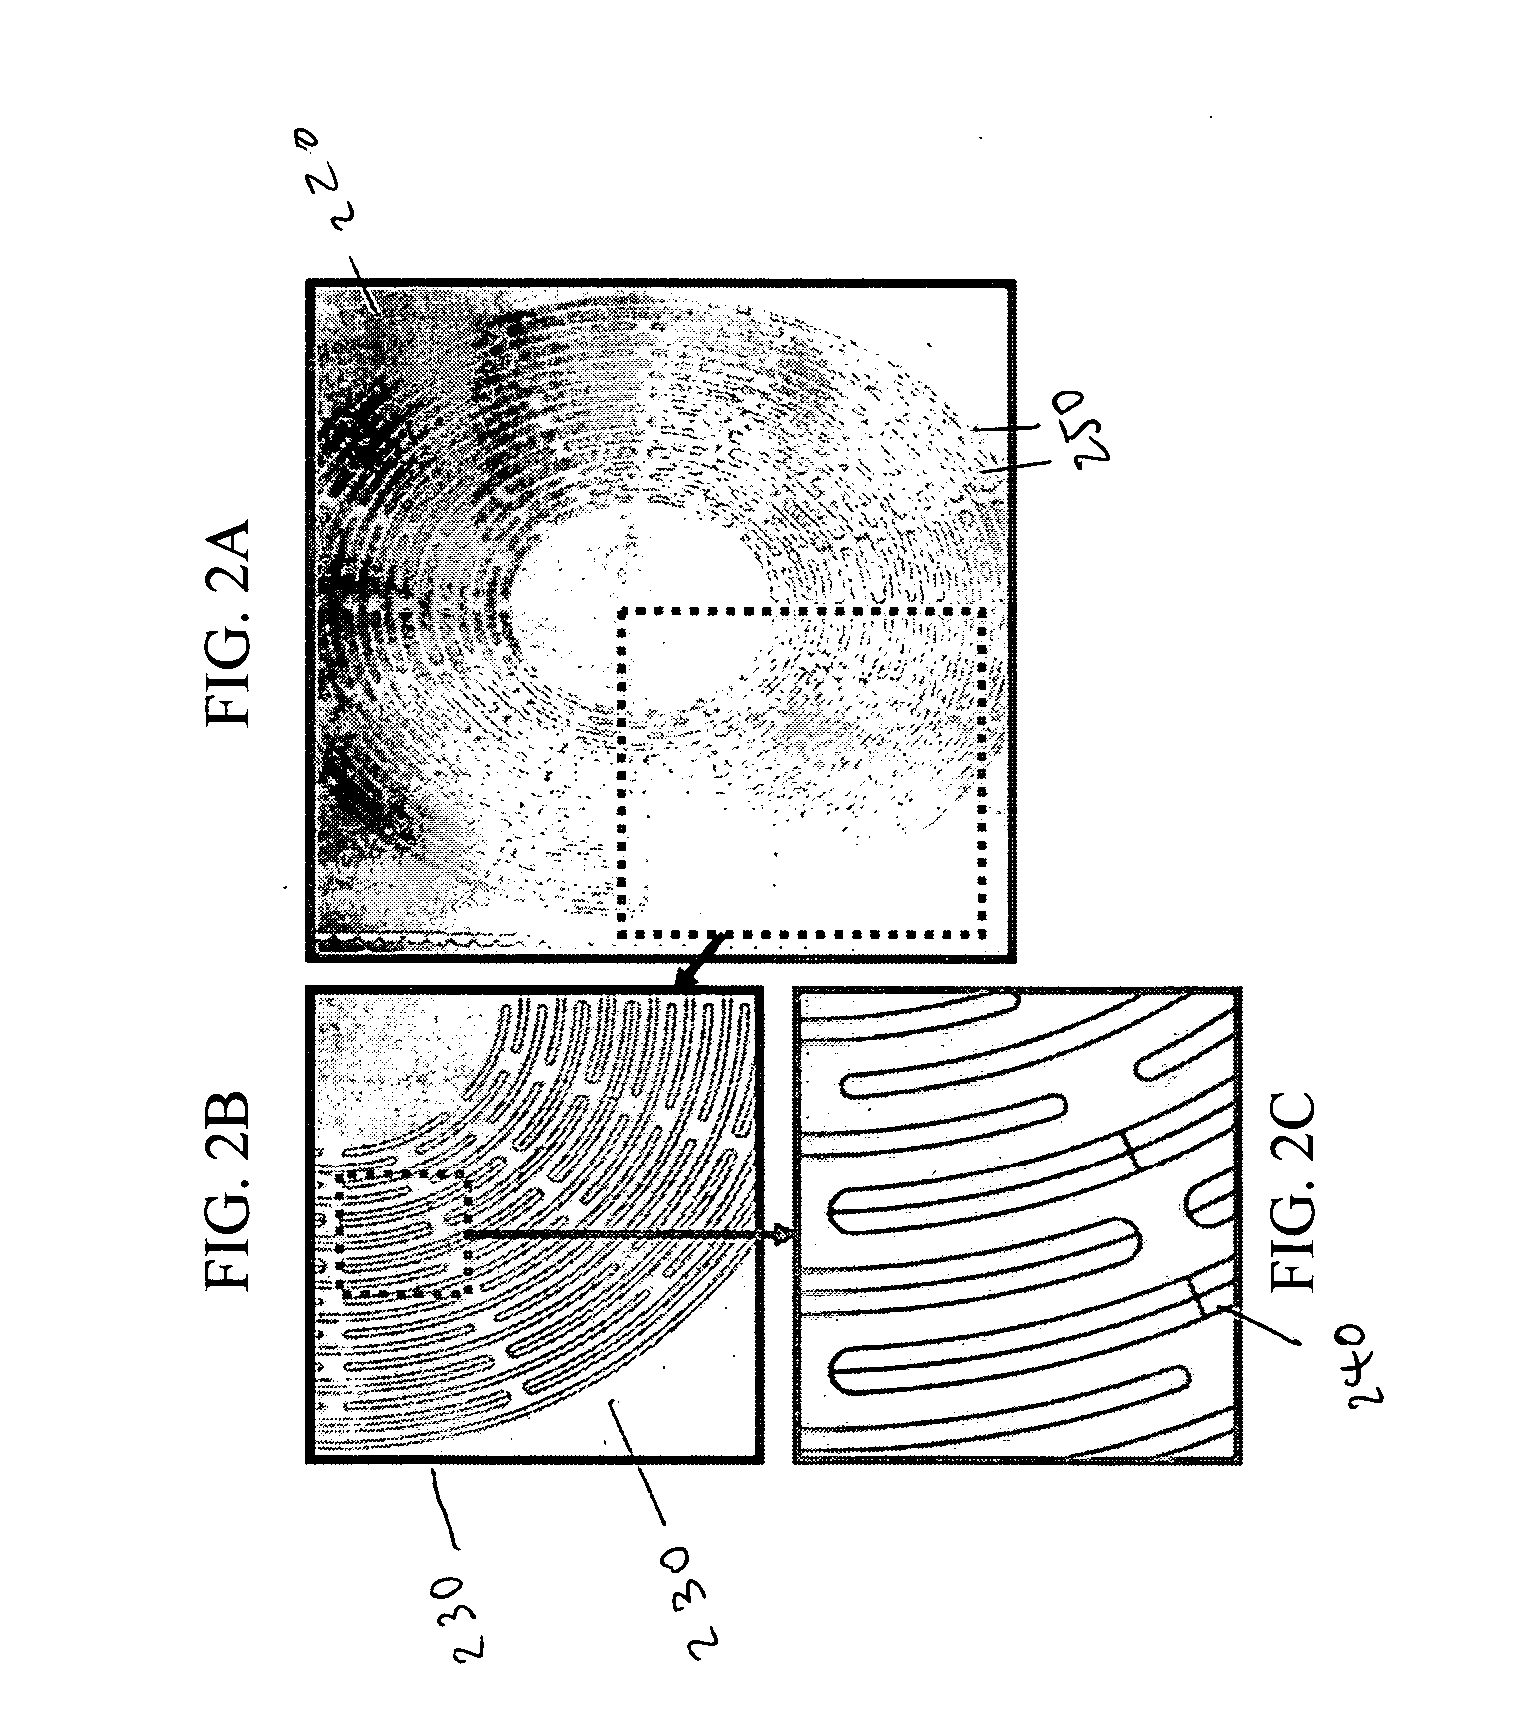 Resonant vibratory device having high quality factor and methods of fabricating same